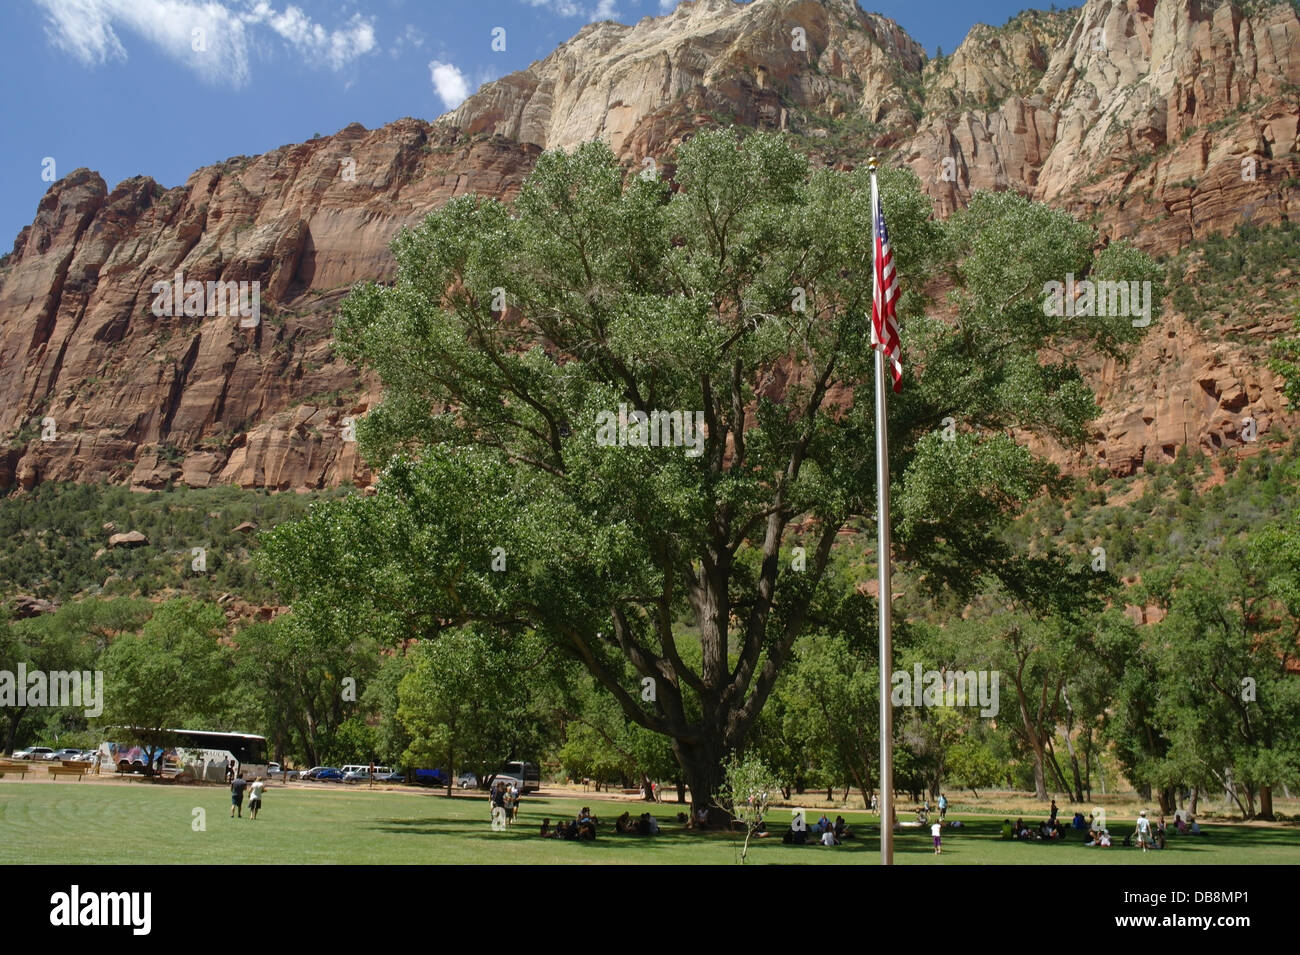 Blue sky view, towards trees, sandstone cliffs, people relaxing green park grass below broad crown tree, Zion Canyon Lodge, Utah Stock Photo